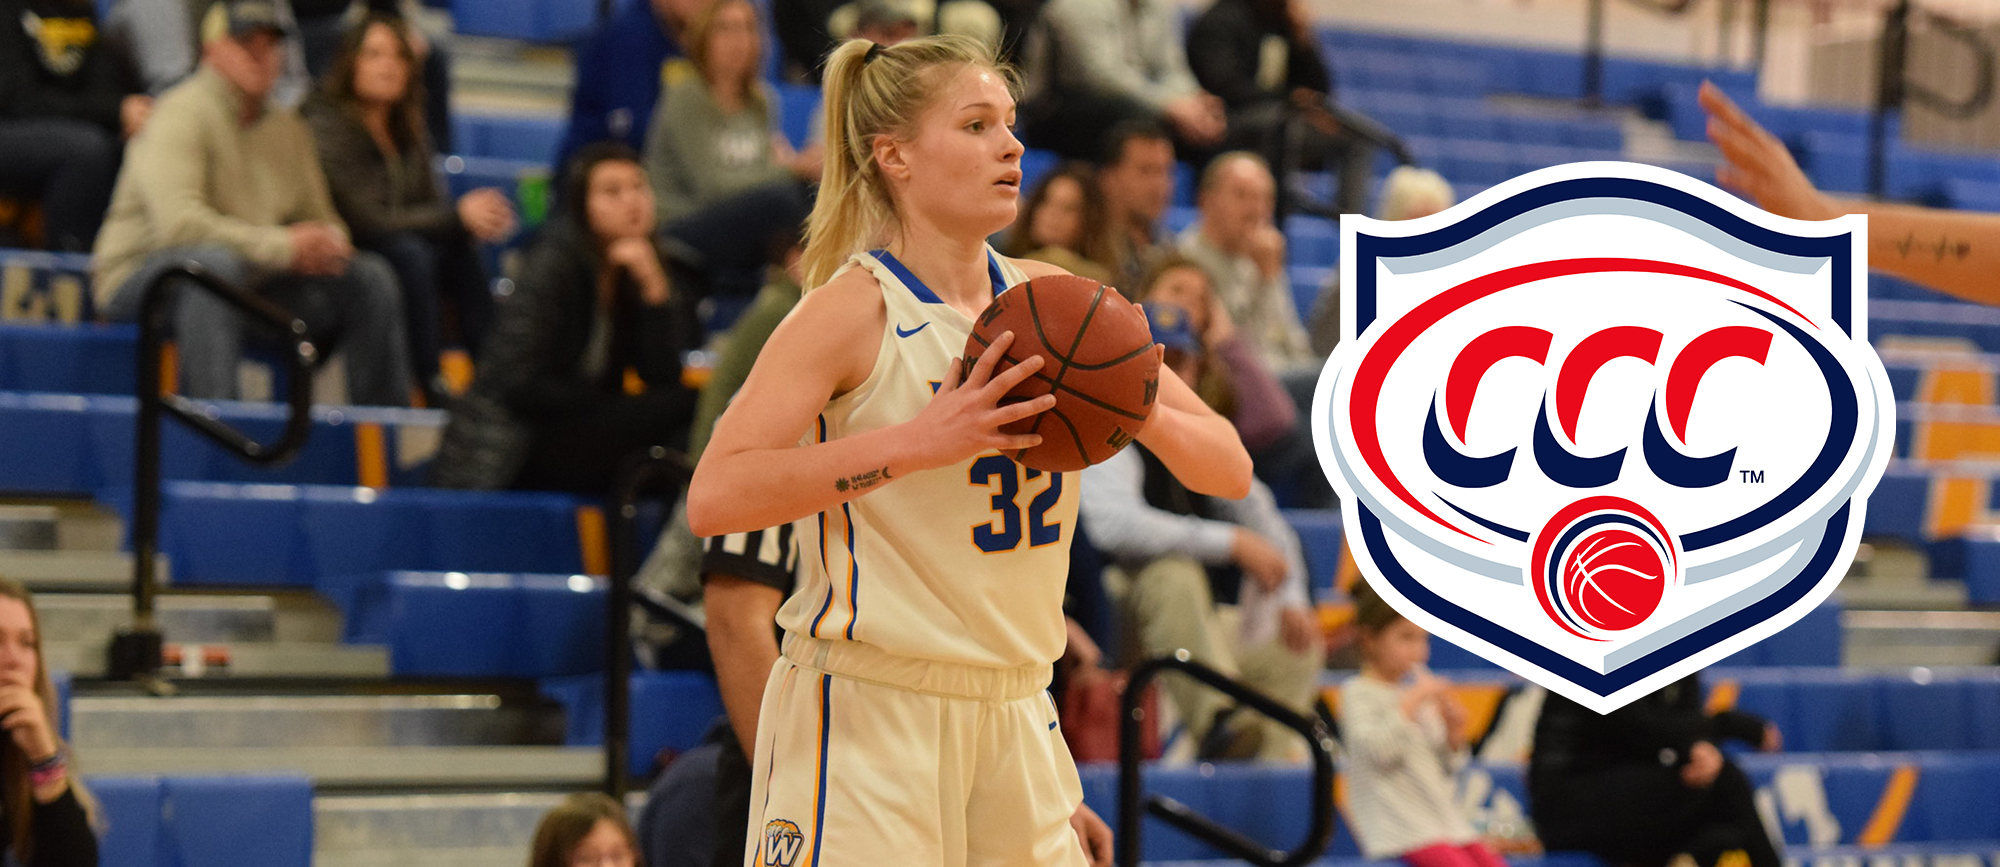 Courtney Carlson Named CCC Player of the Week